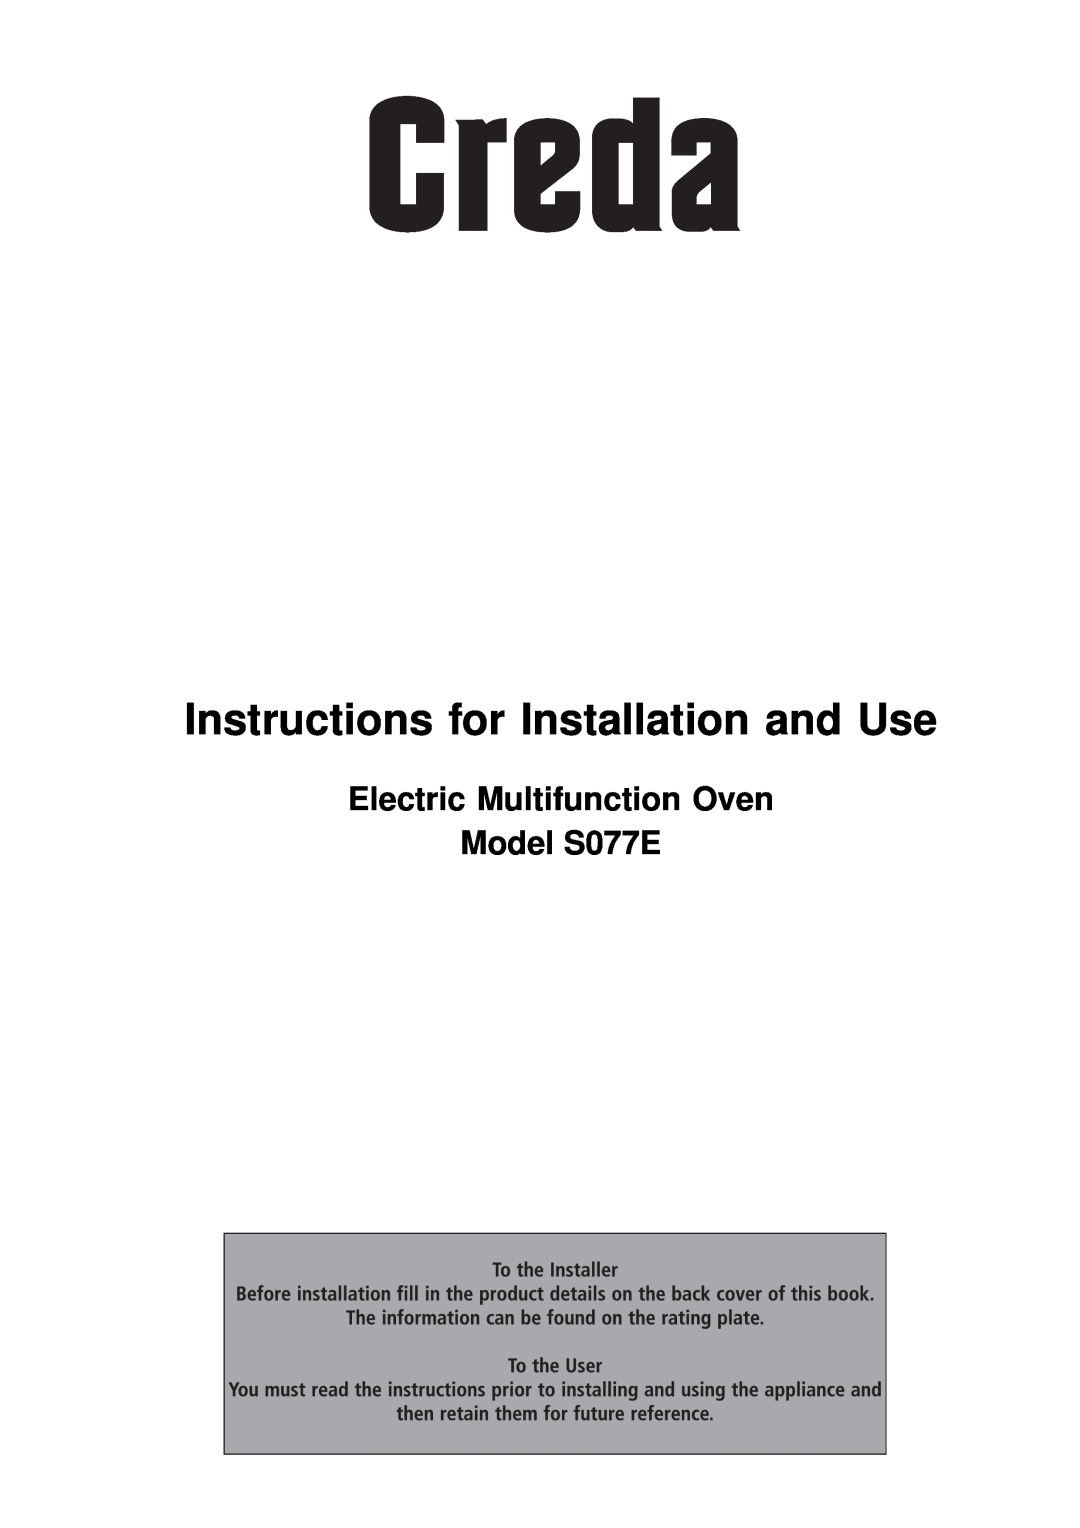 Creda manual Electric Multifunction Oven Model S077E, Instructions for Installation and Use 